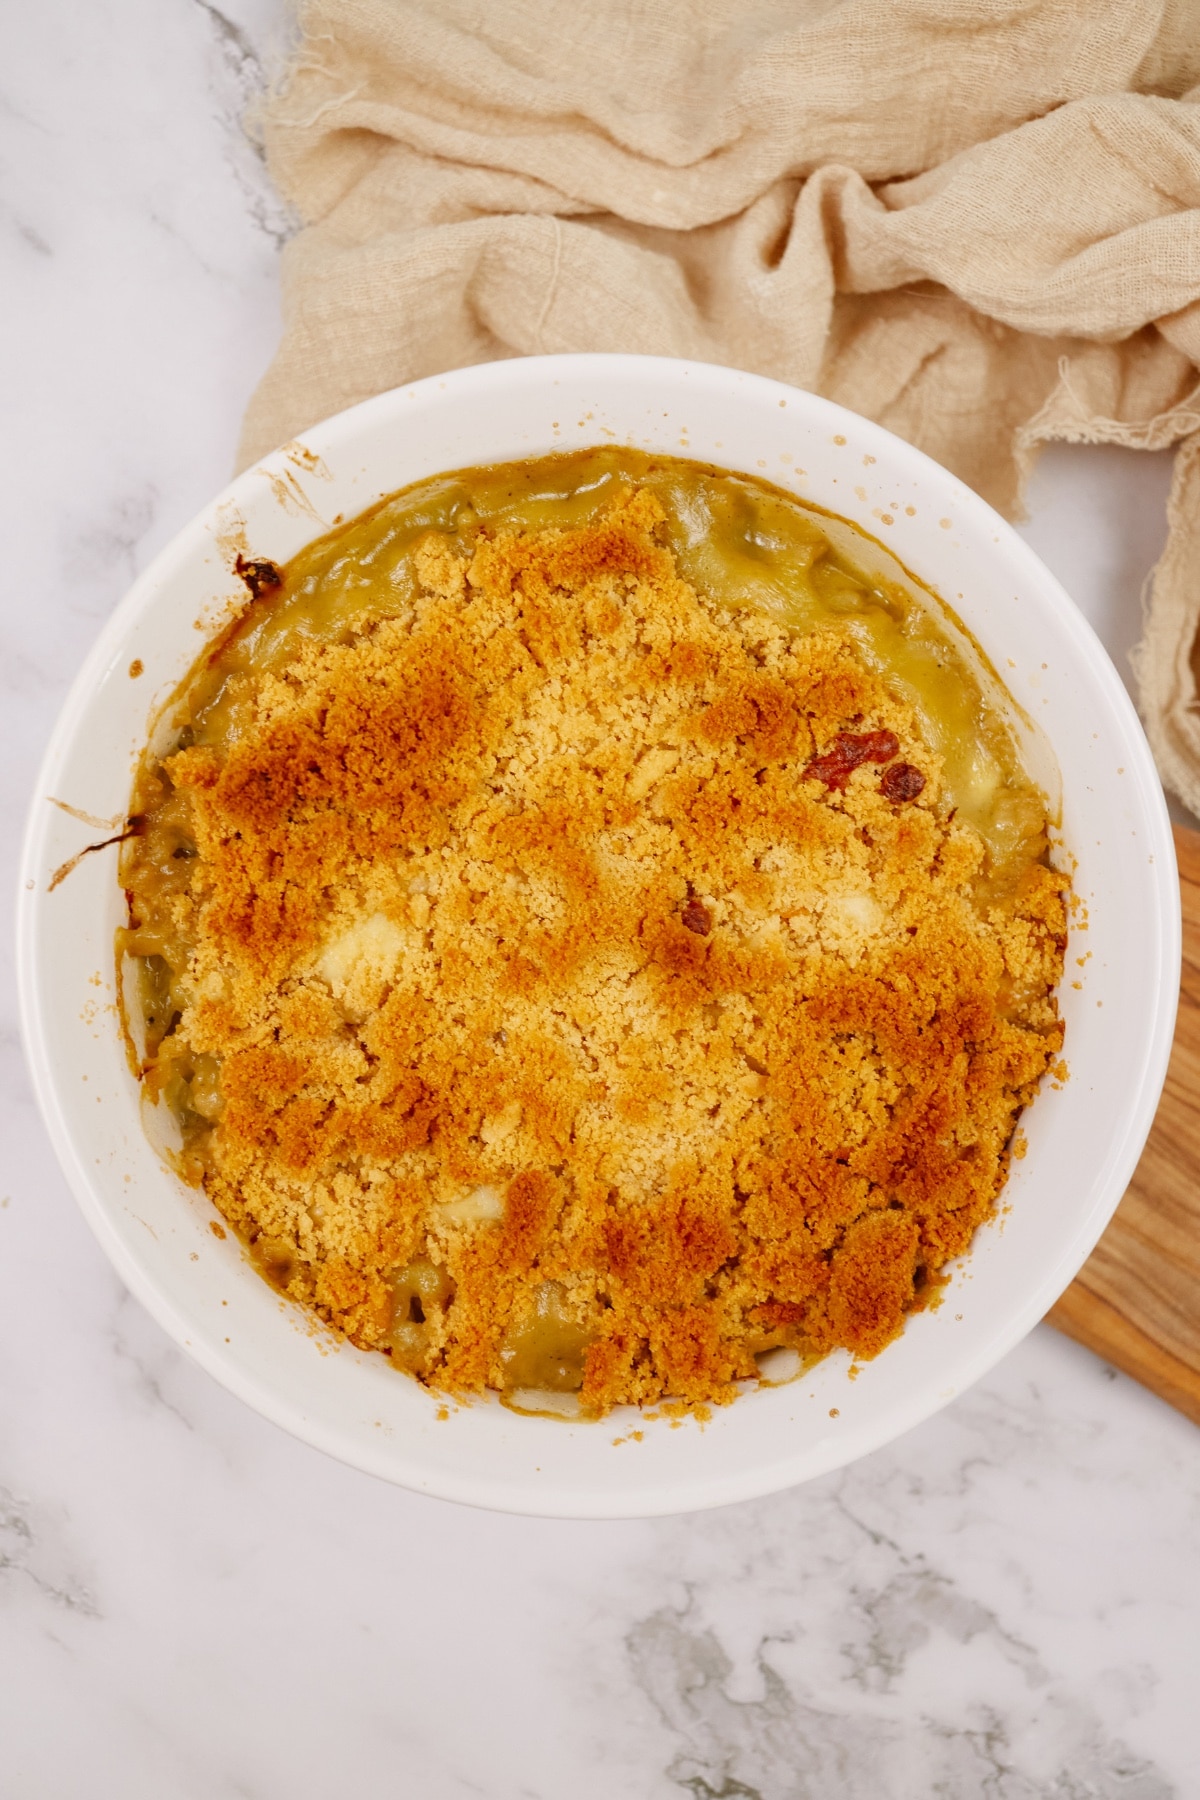 cabbage casserole baked in a round baking dish on a white marble surface